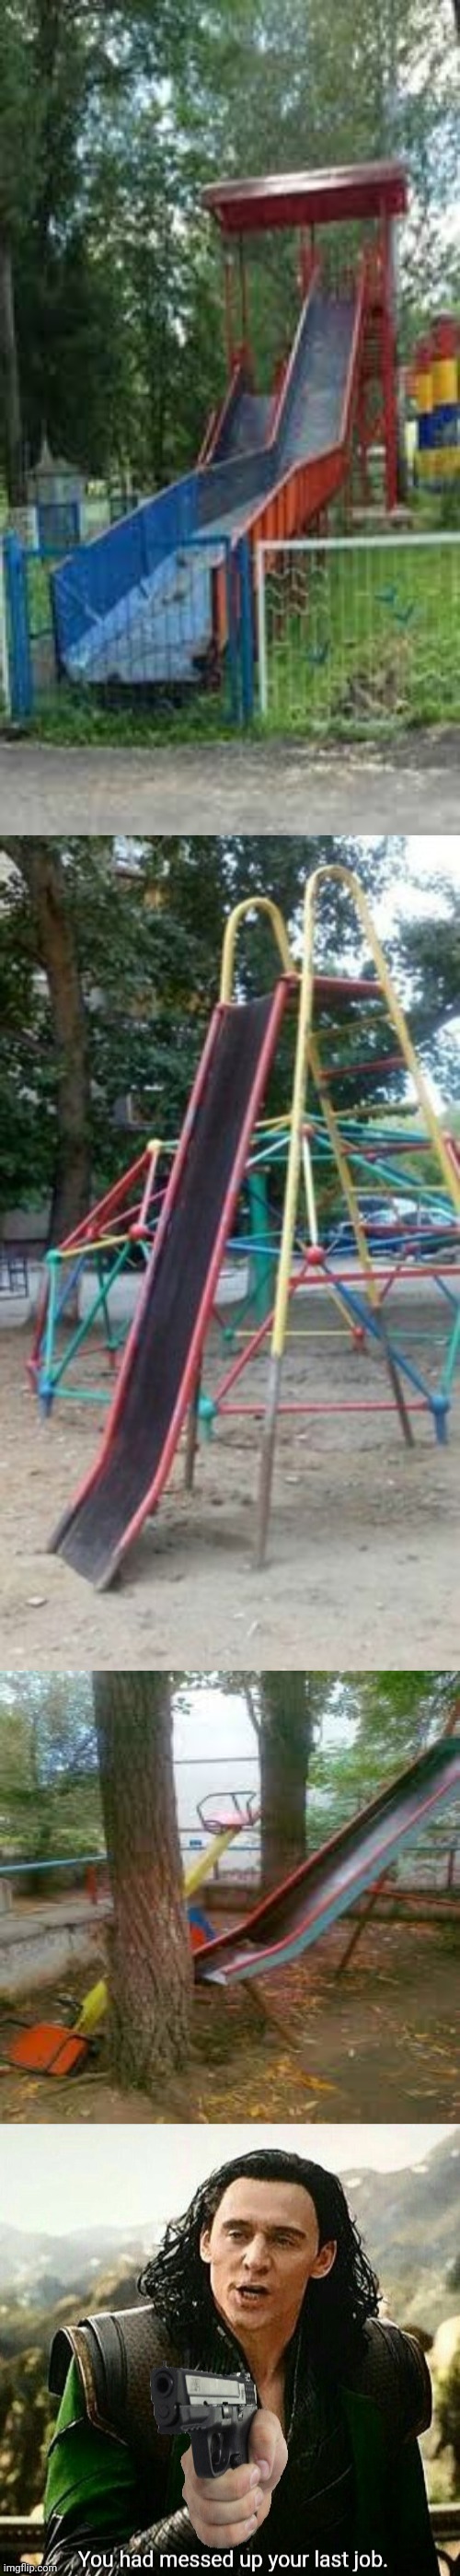 The playground slides building job fail | image tagged in you had messed up your last job,playground,slide,you had one job,memes,meme | made w/ Imgflip meme maker